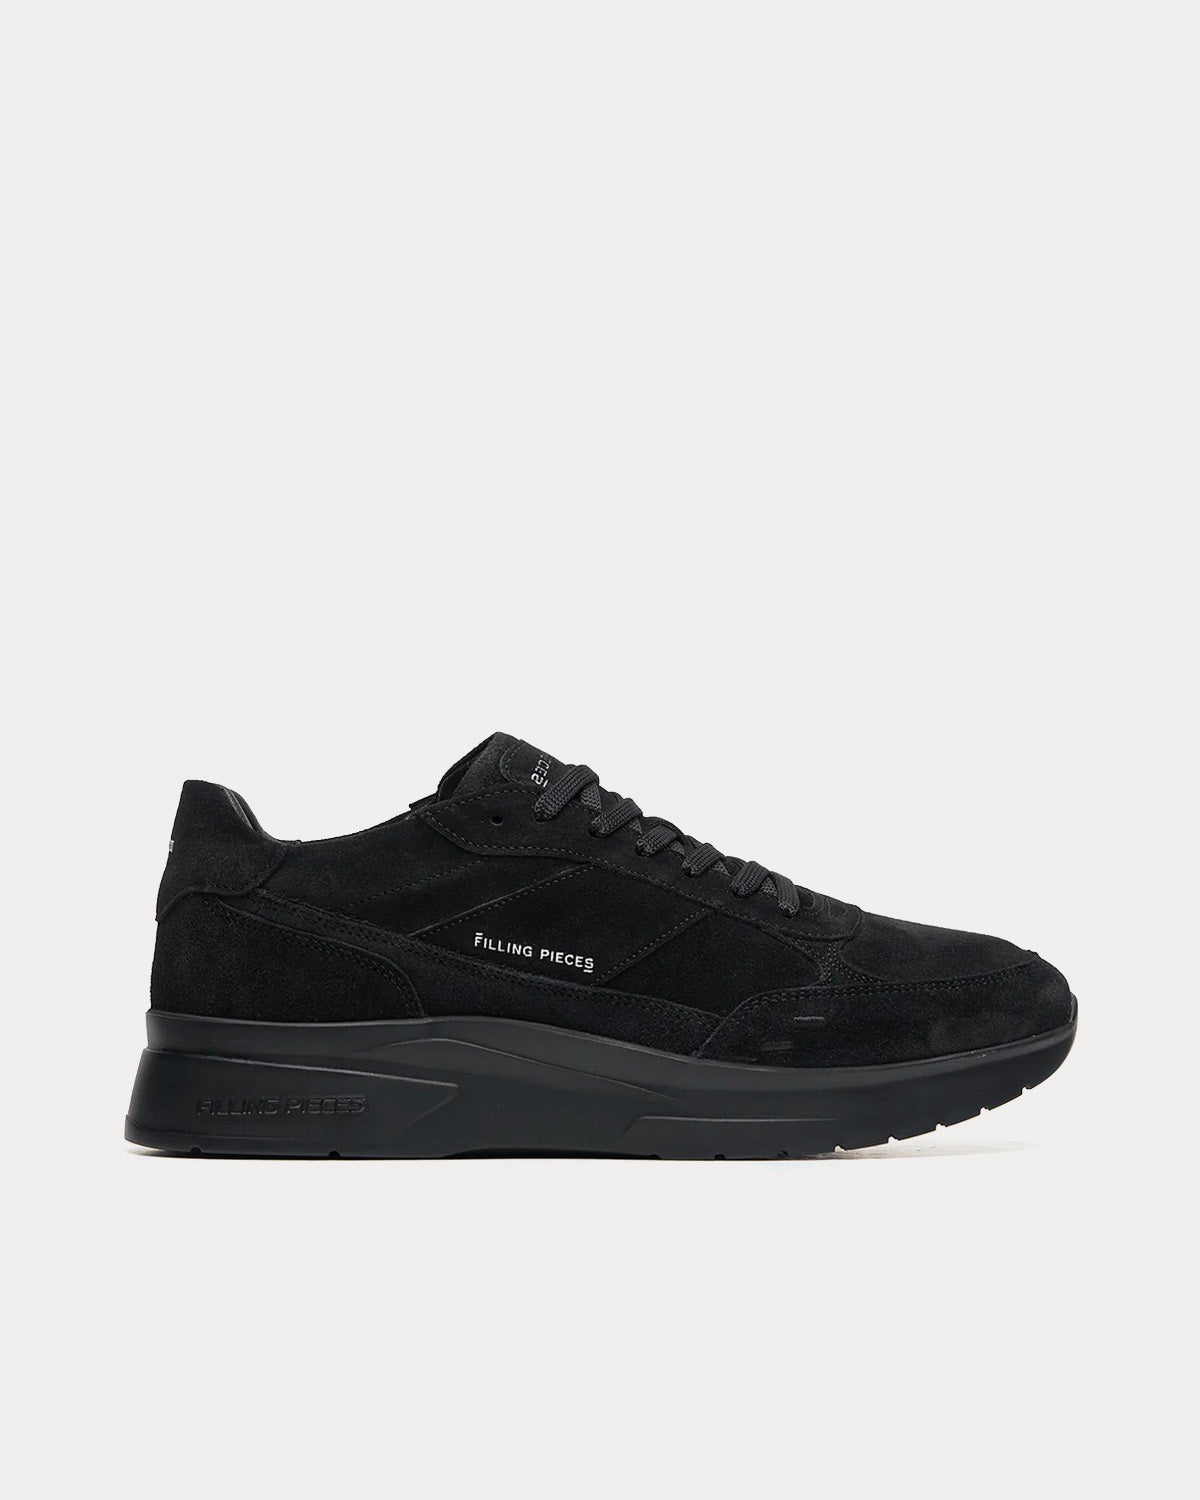 Filling Pieces - Jet Runner All Black Low Top Sneakers